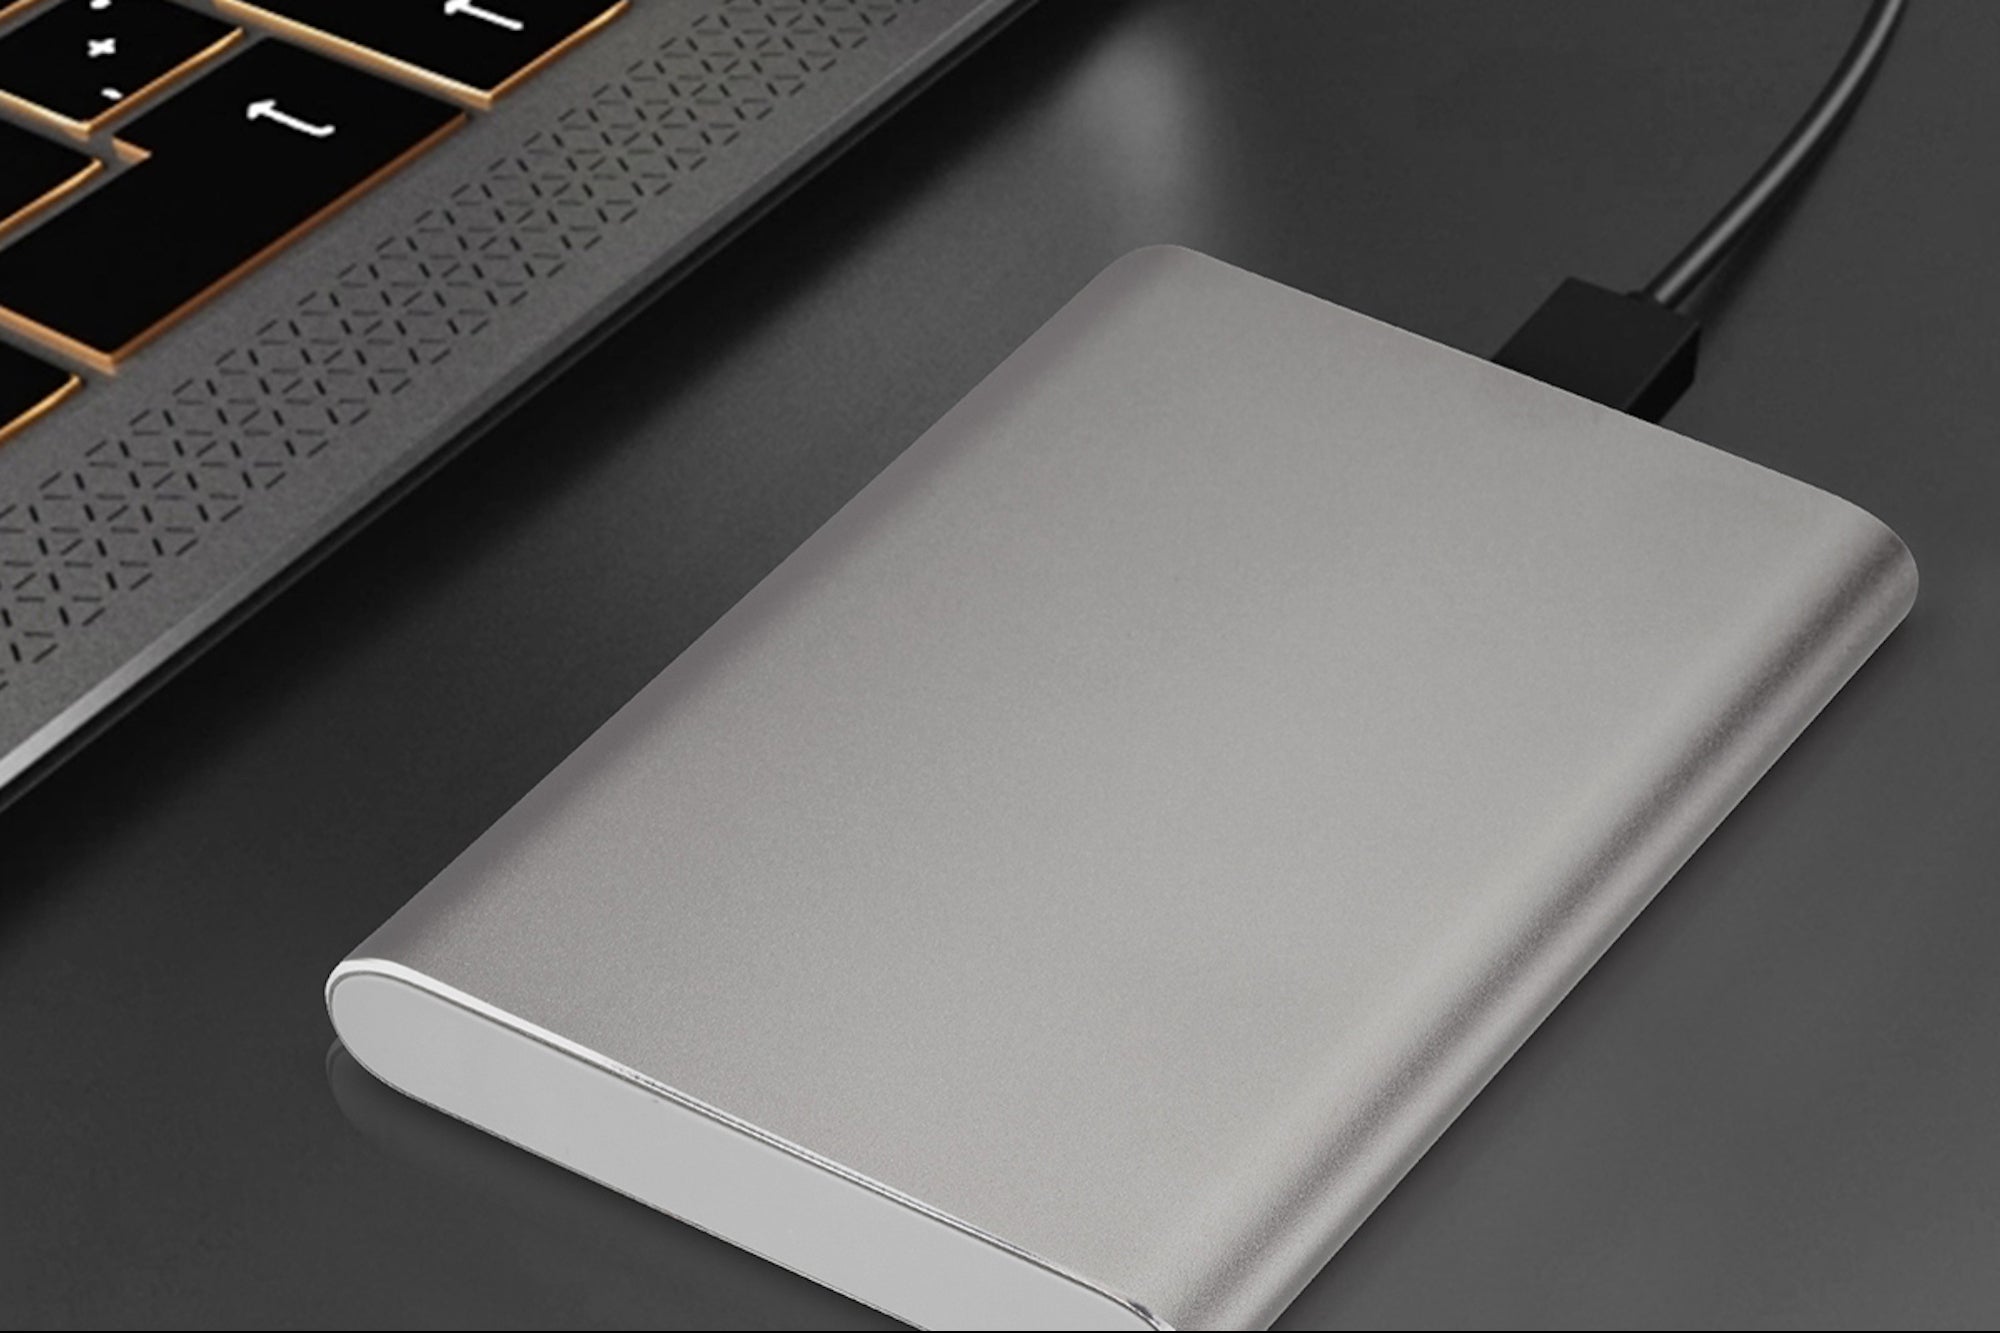 Save Your Essential Files on a 500GB External Hard Drive